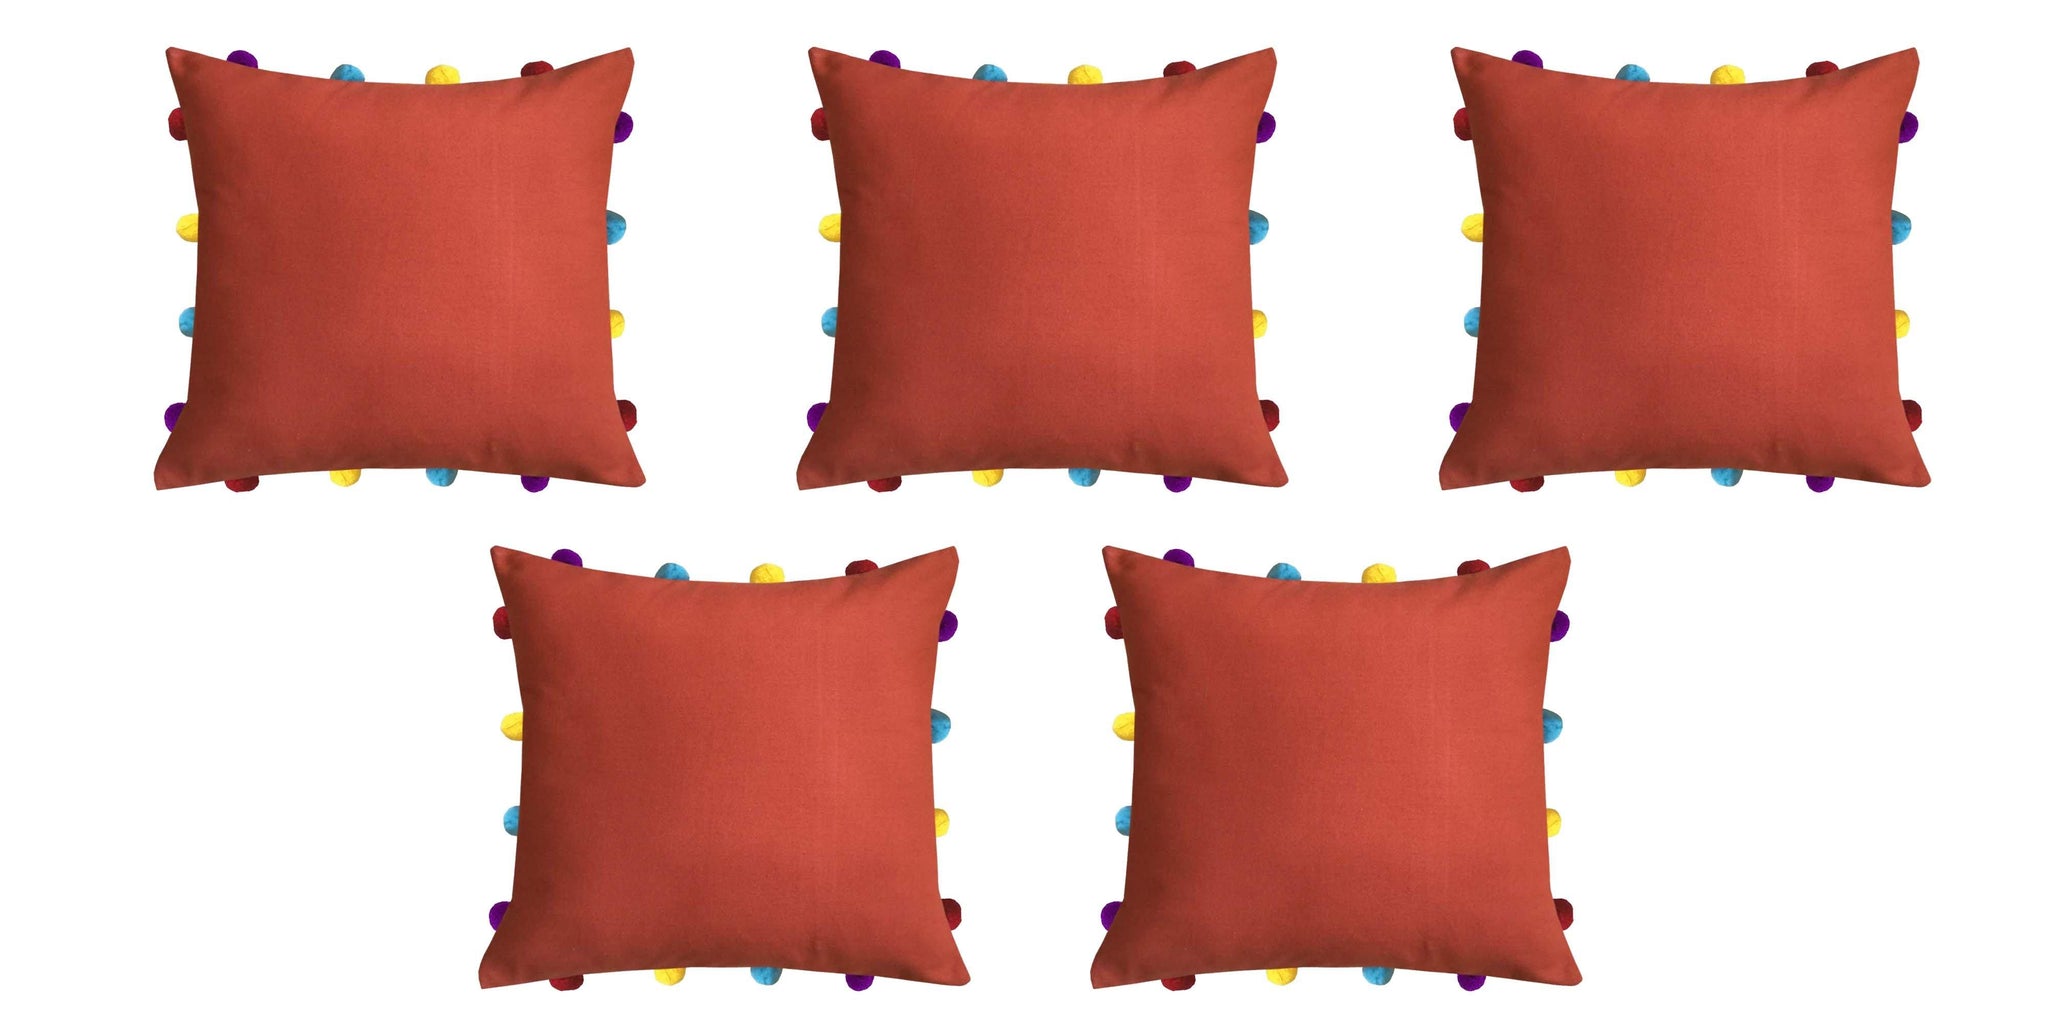 Lushomes Red Wood Cushion Cover with Colorful pom poms (5 pcs, 14 x 14”) - Lushomes